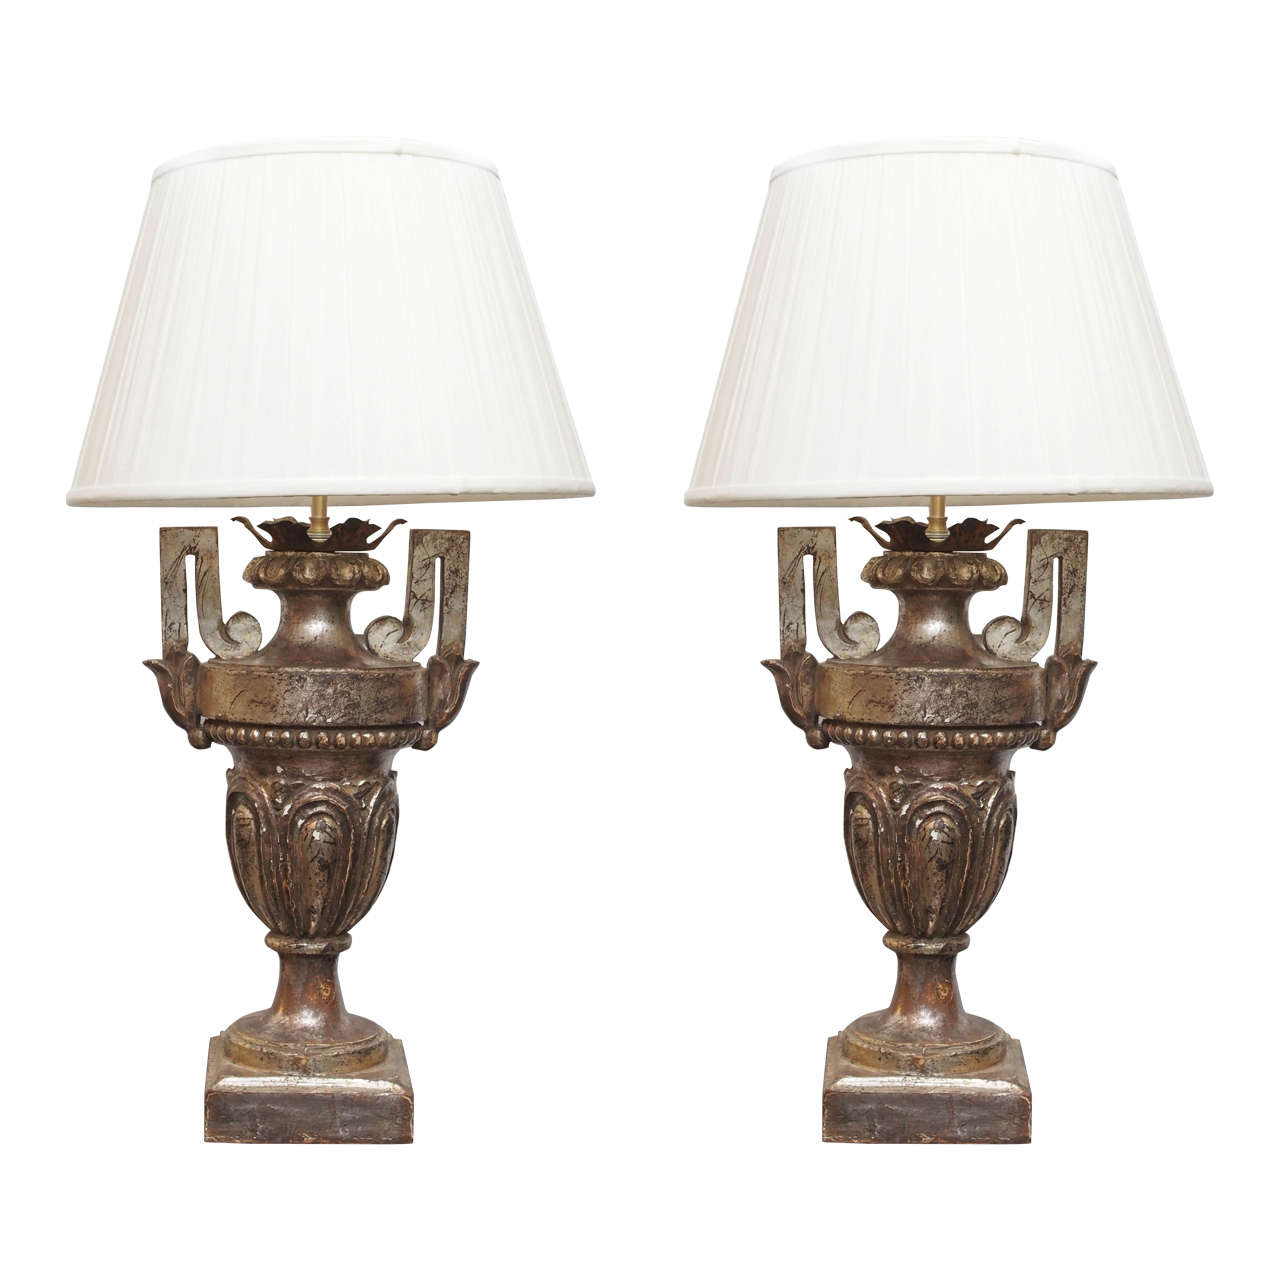 Pair of 19th Century Silver Gilt Urns now Mounted as Table Lamps